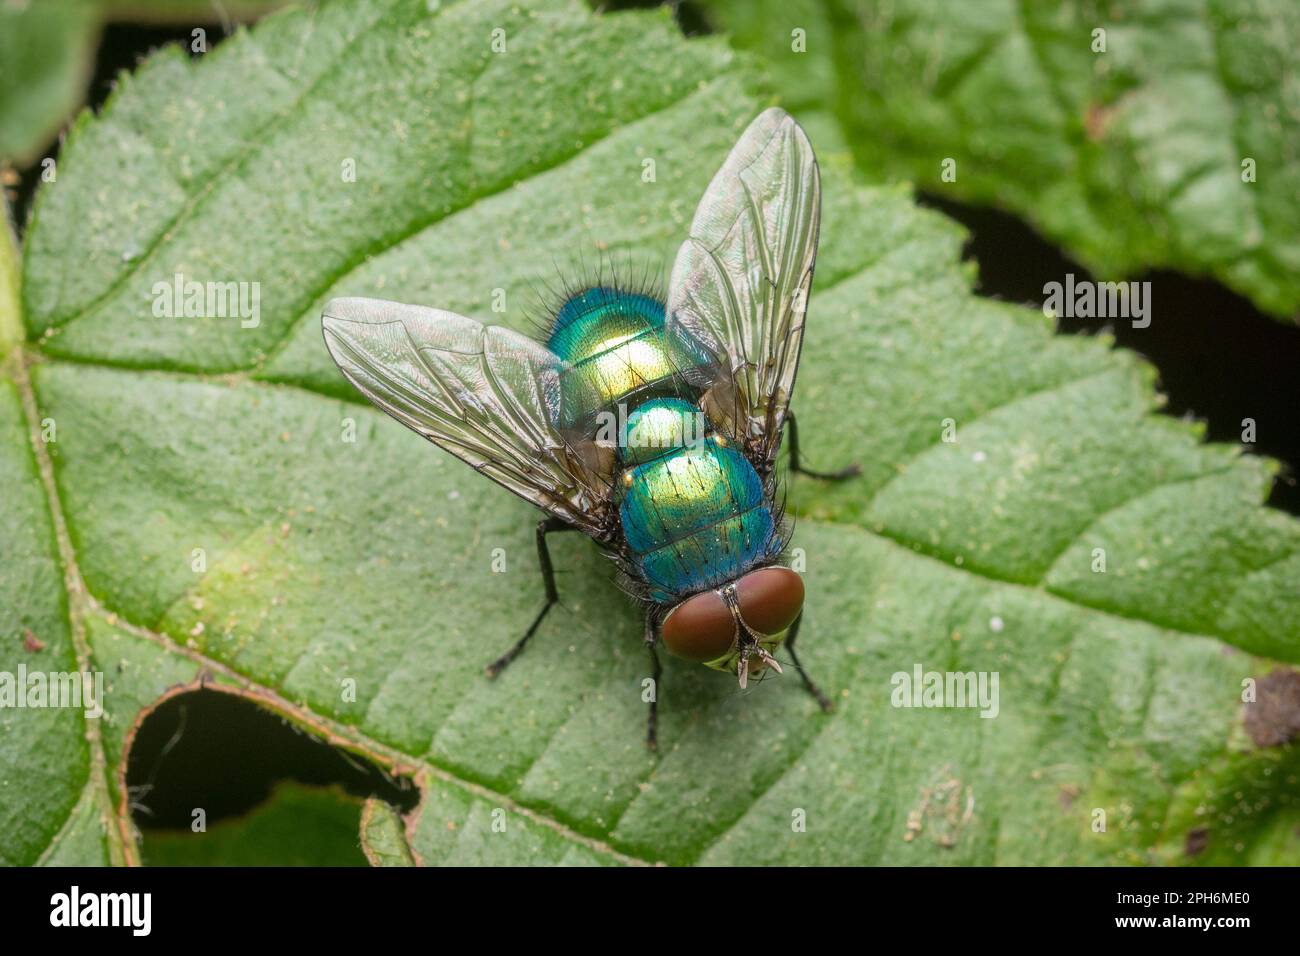 A greenbottle fly seen in the Derwent Walk Country Park, Gateshead, North East England Stock Photo